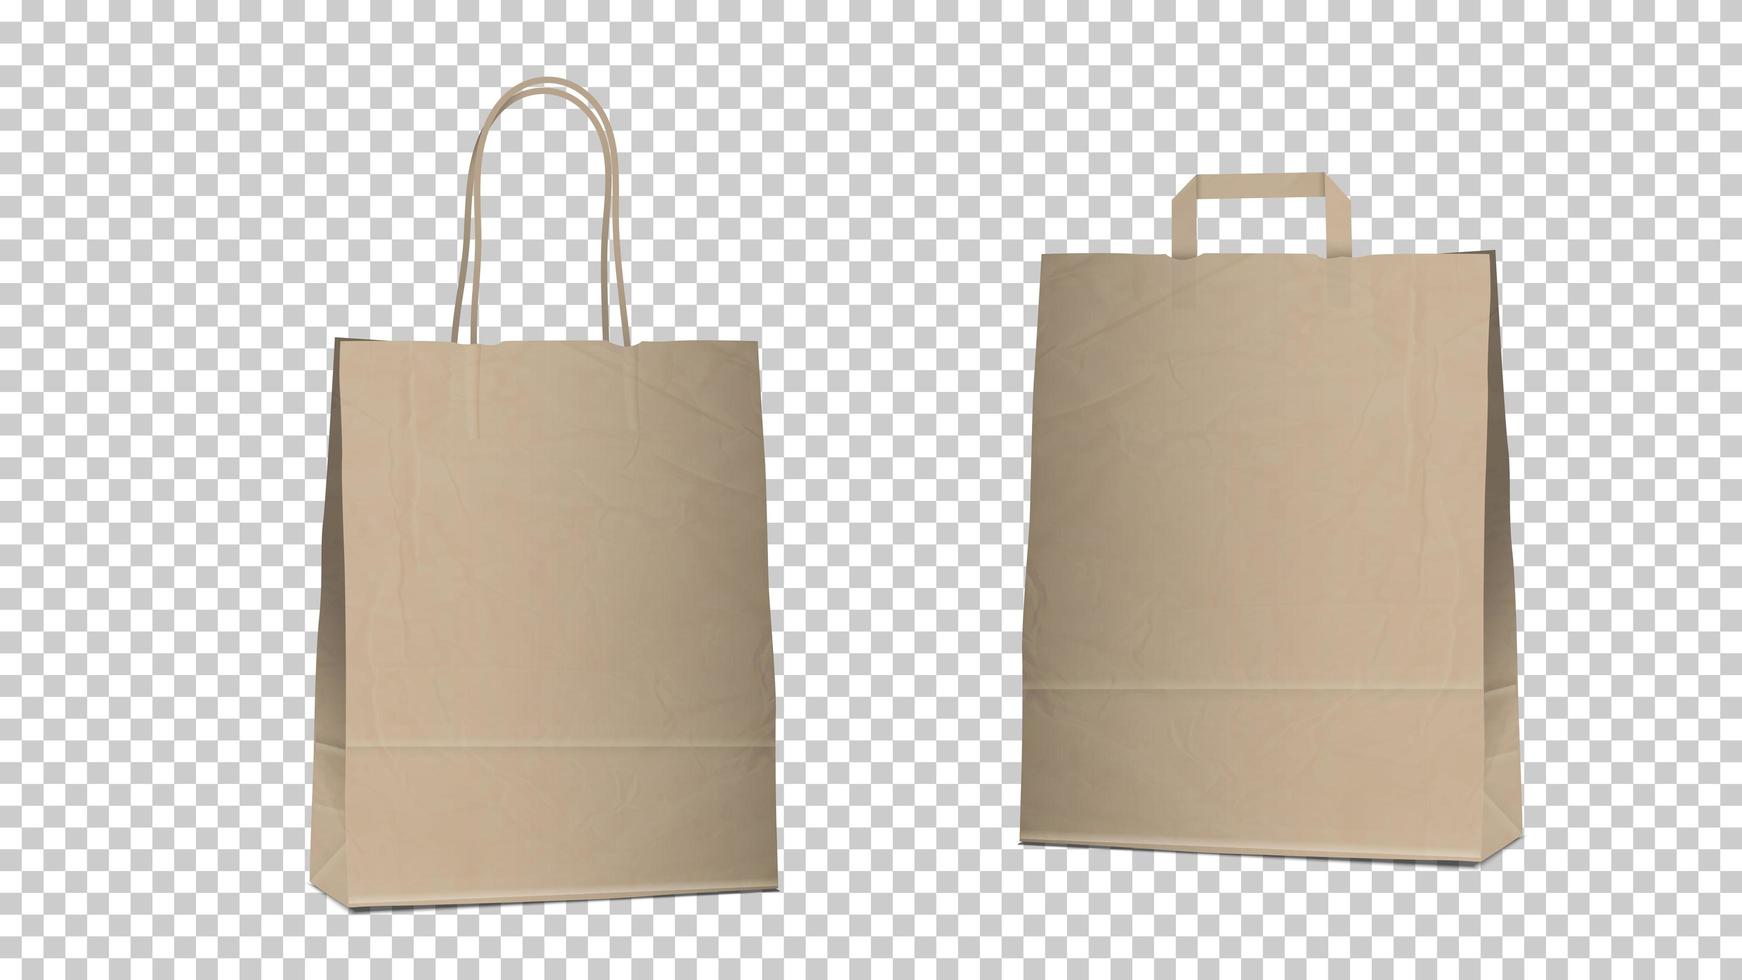 Shopping empty bags isolated, two different blank recyclable brown paper bags with handles for packaging and shopping vector